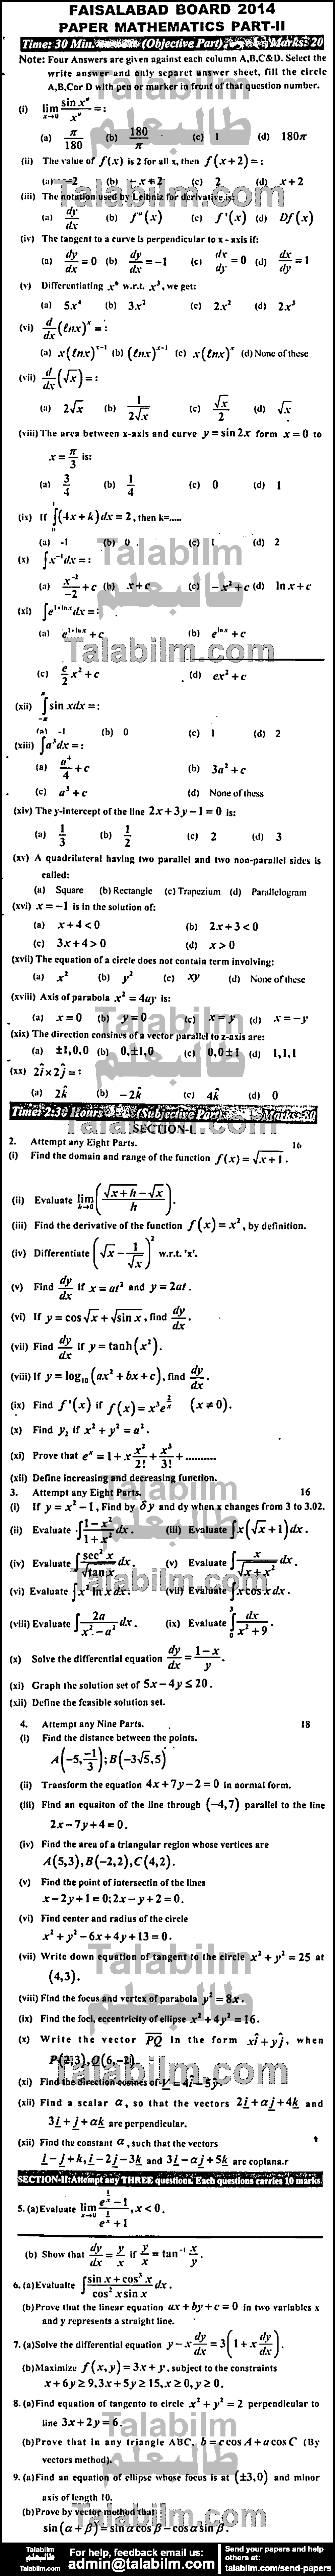 Math 0 past paper for Group-II 2014